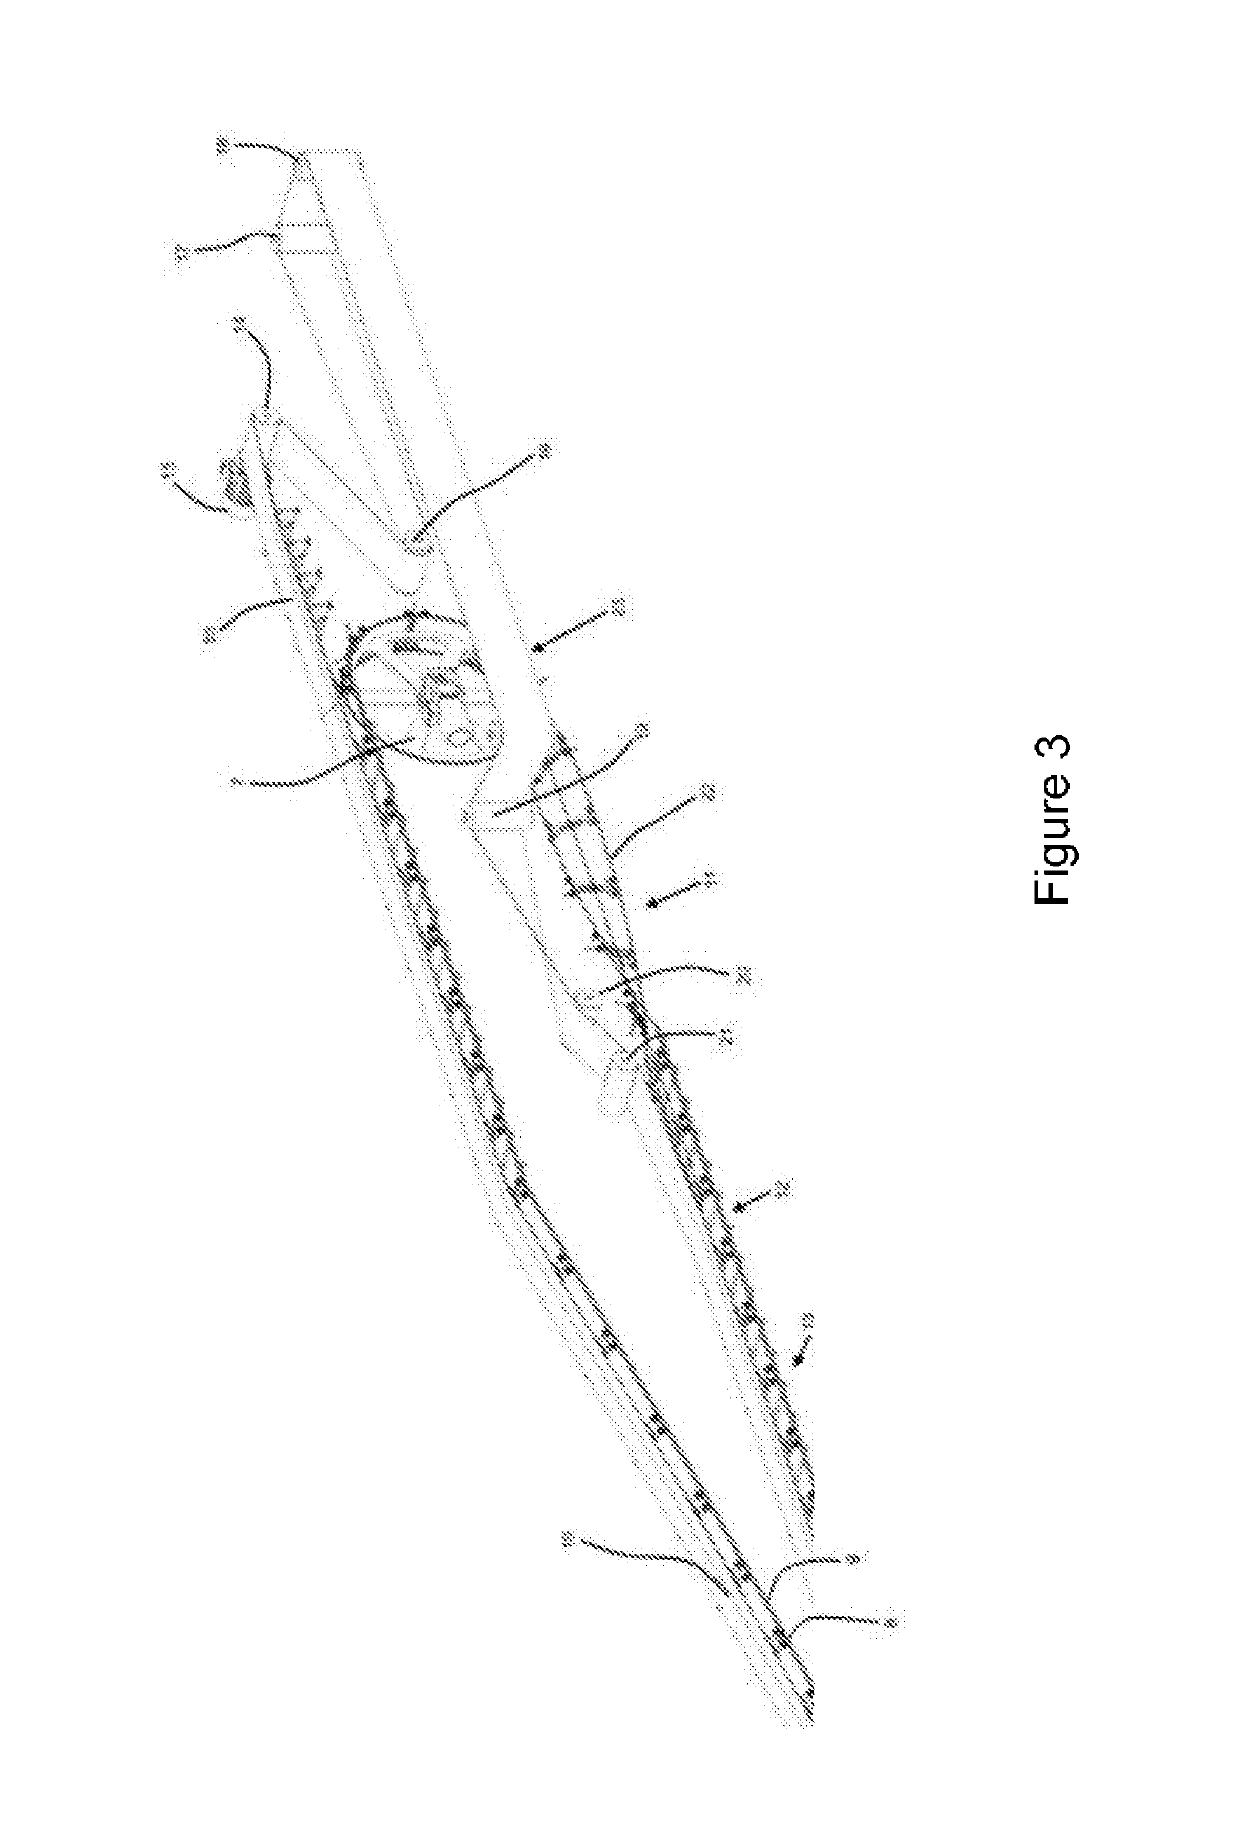 Rail conveyor system with vertical carriage return